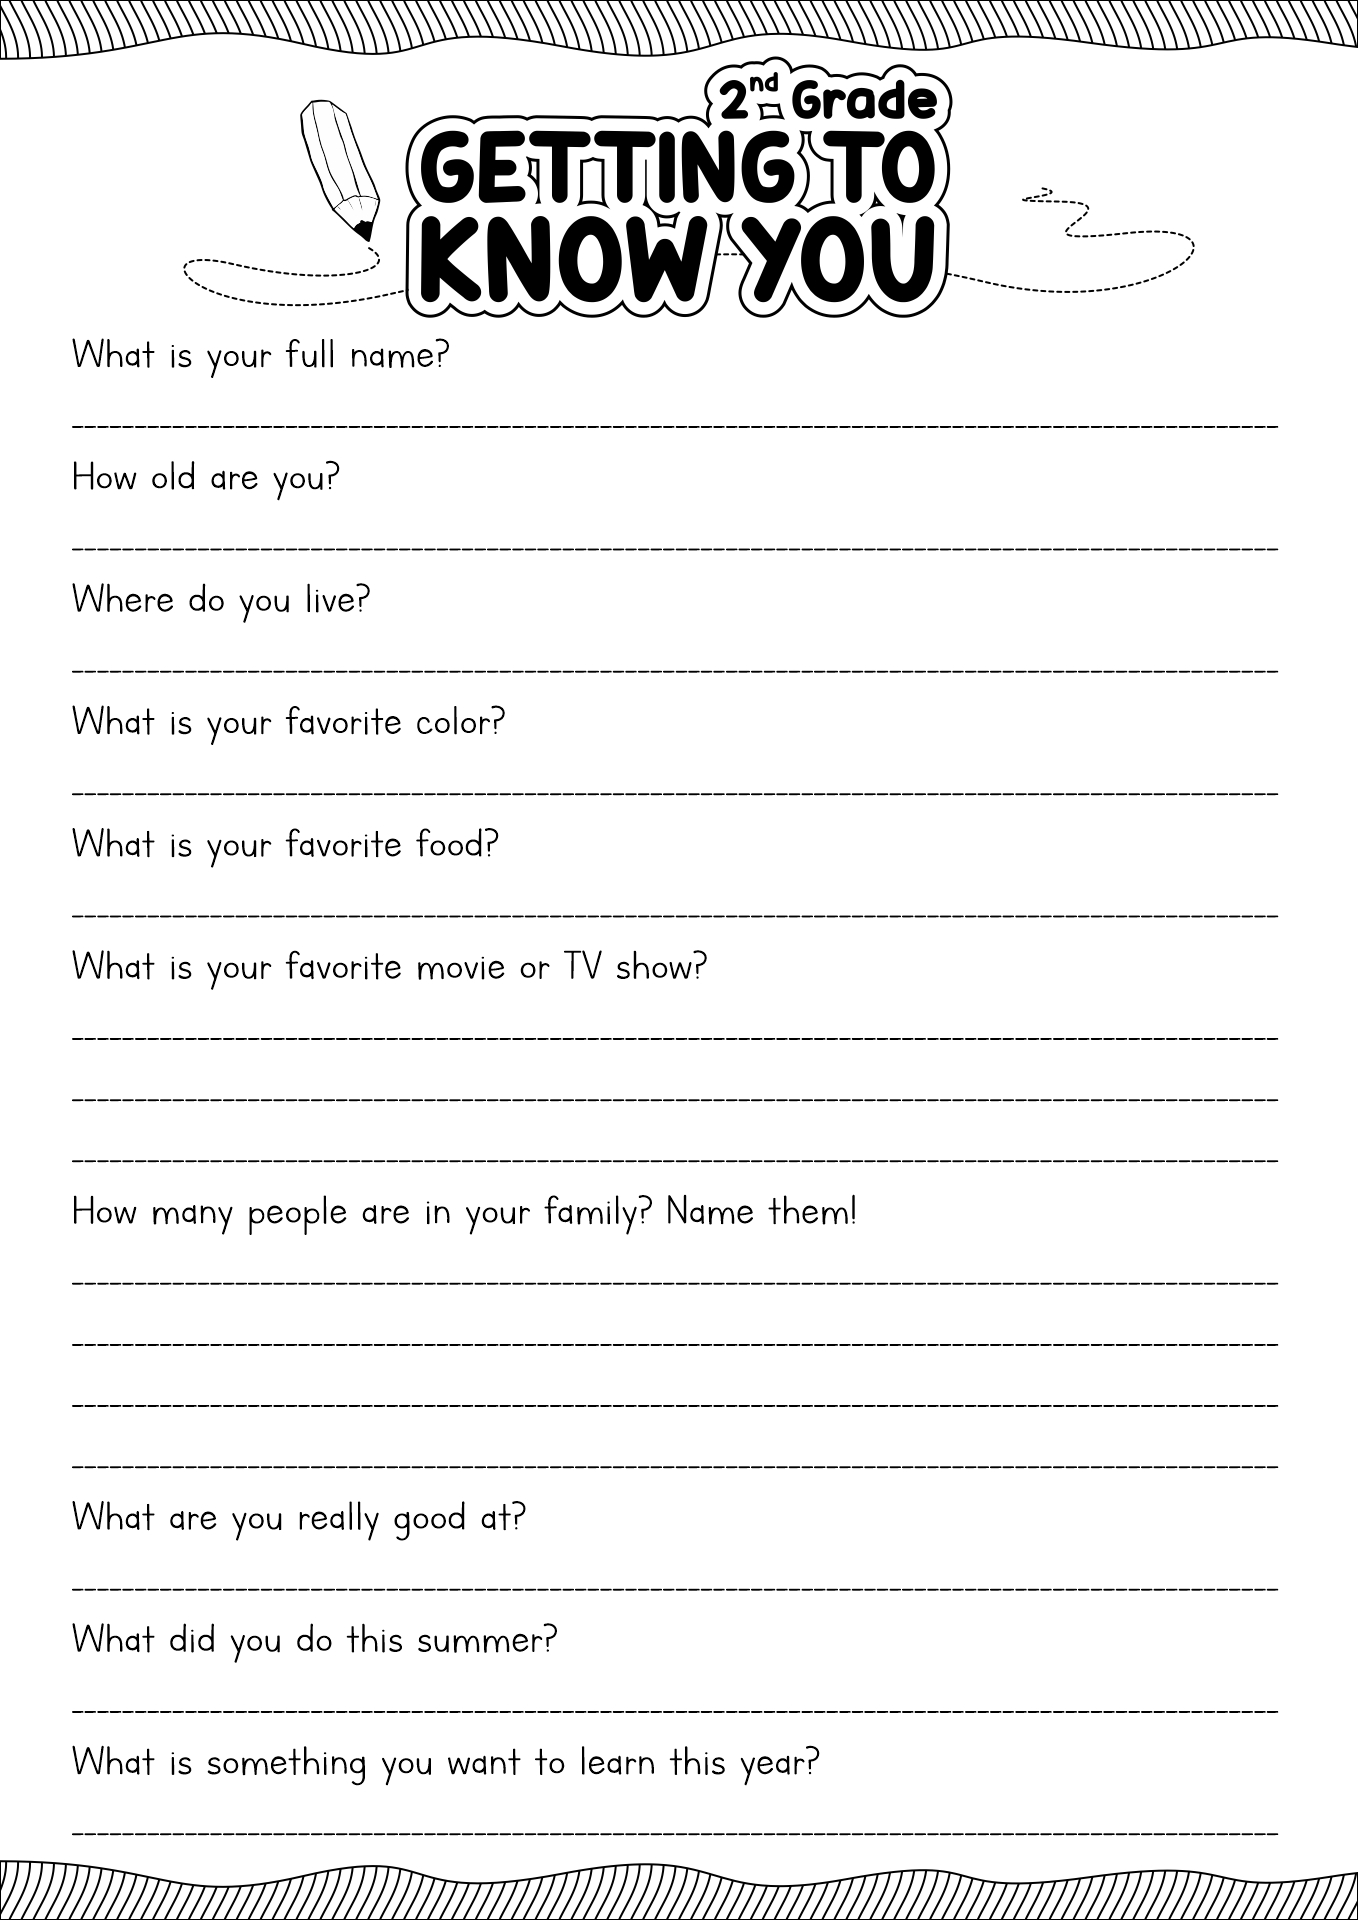 13 Best Images of Get To Know Me Worksheet Get to Know You Worksheet